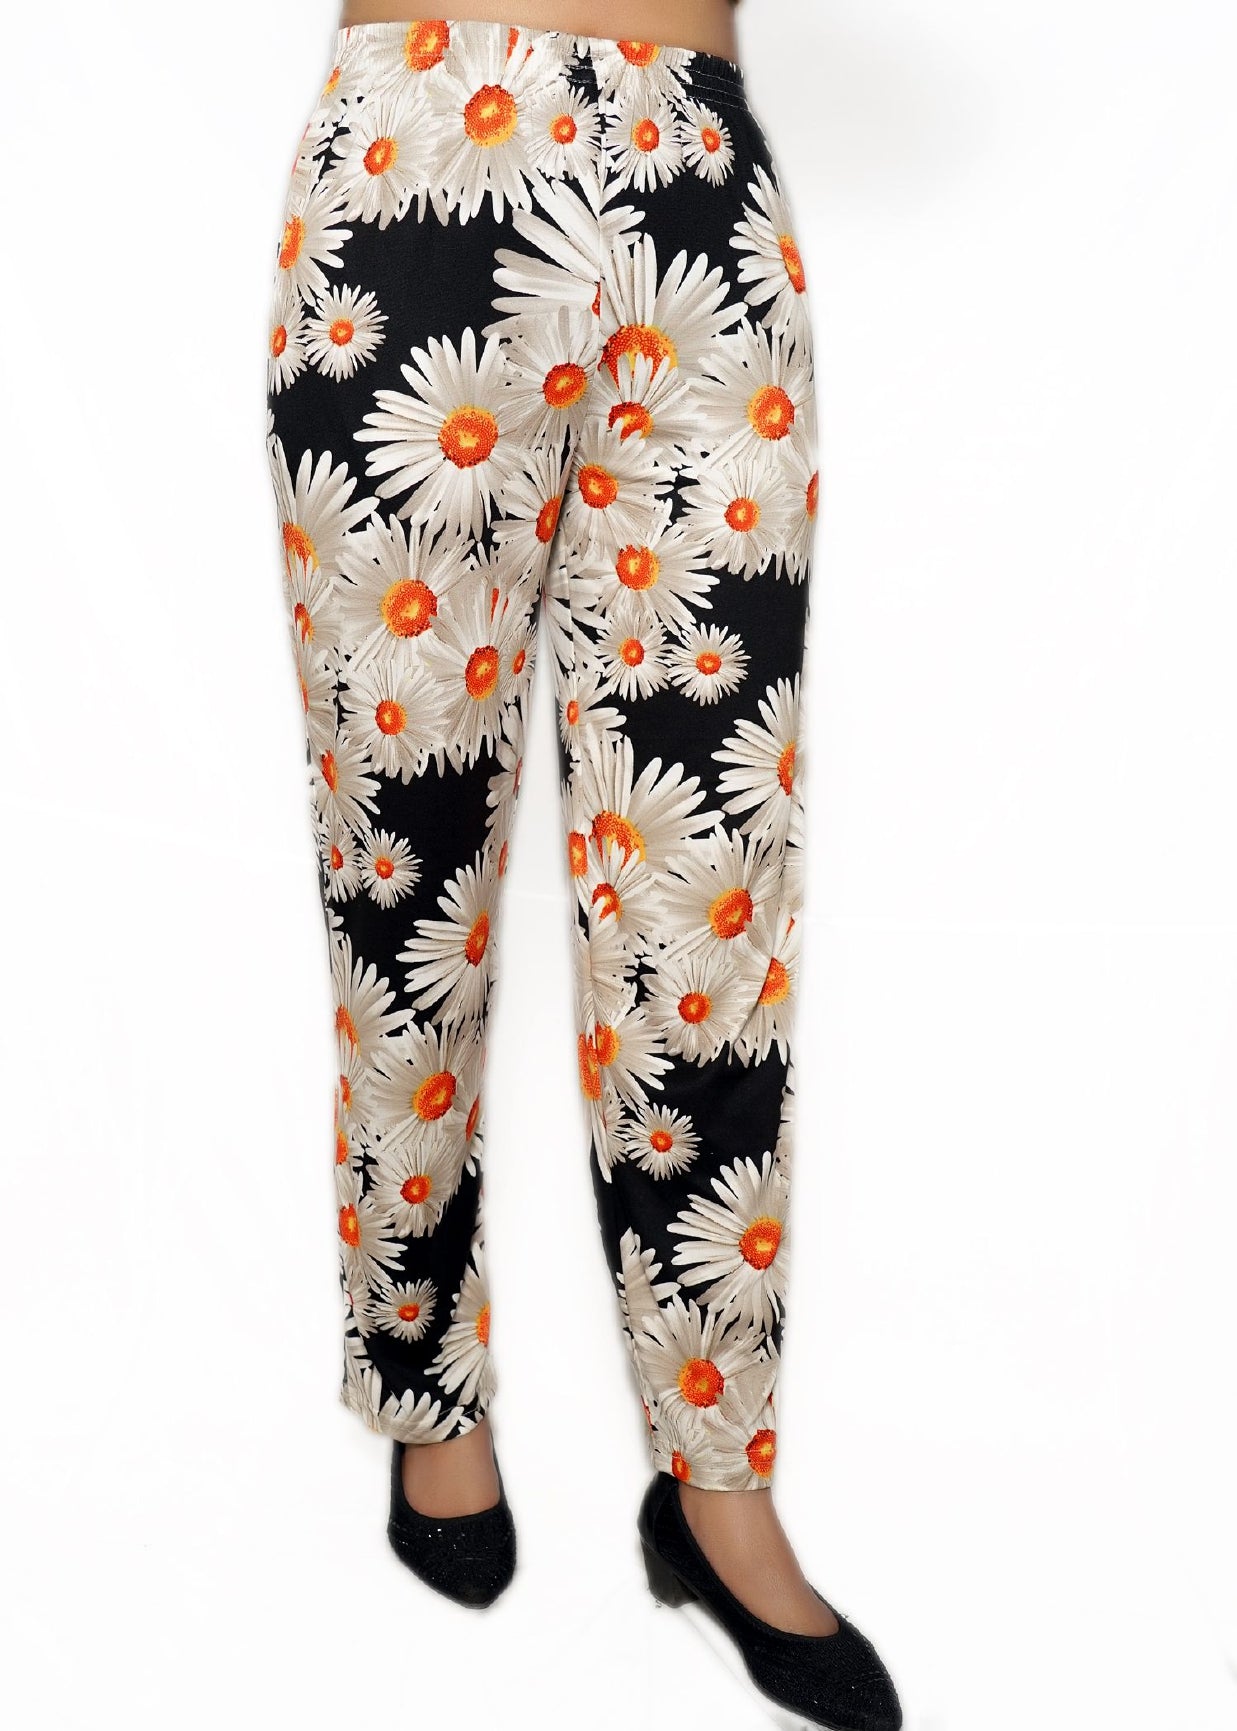 Ladies stylish printed Polyester soft touch Jogging Pyjama Bottoms Pants Multi color Size M to 4XL